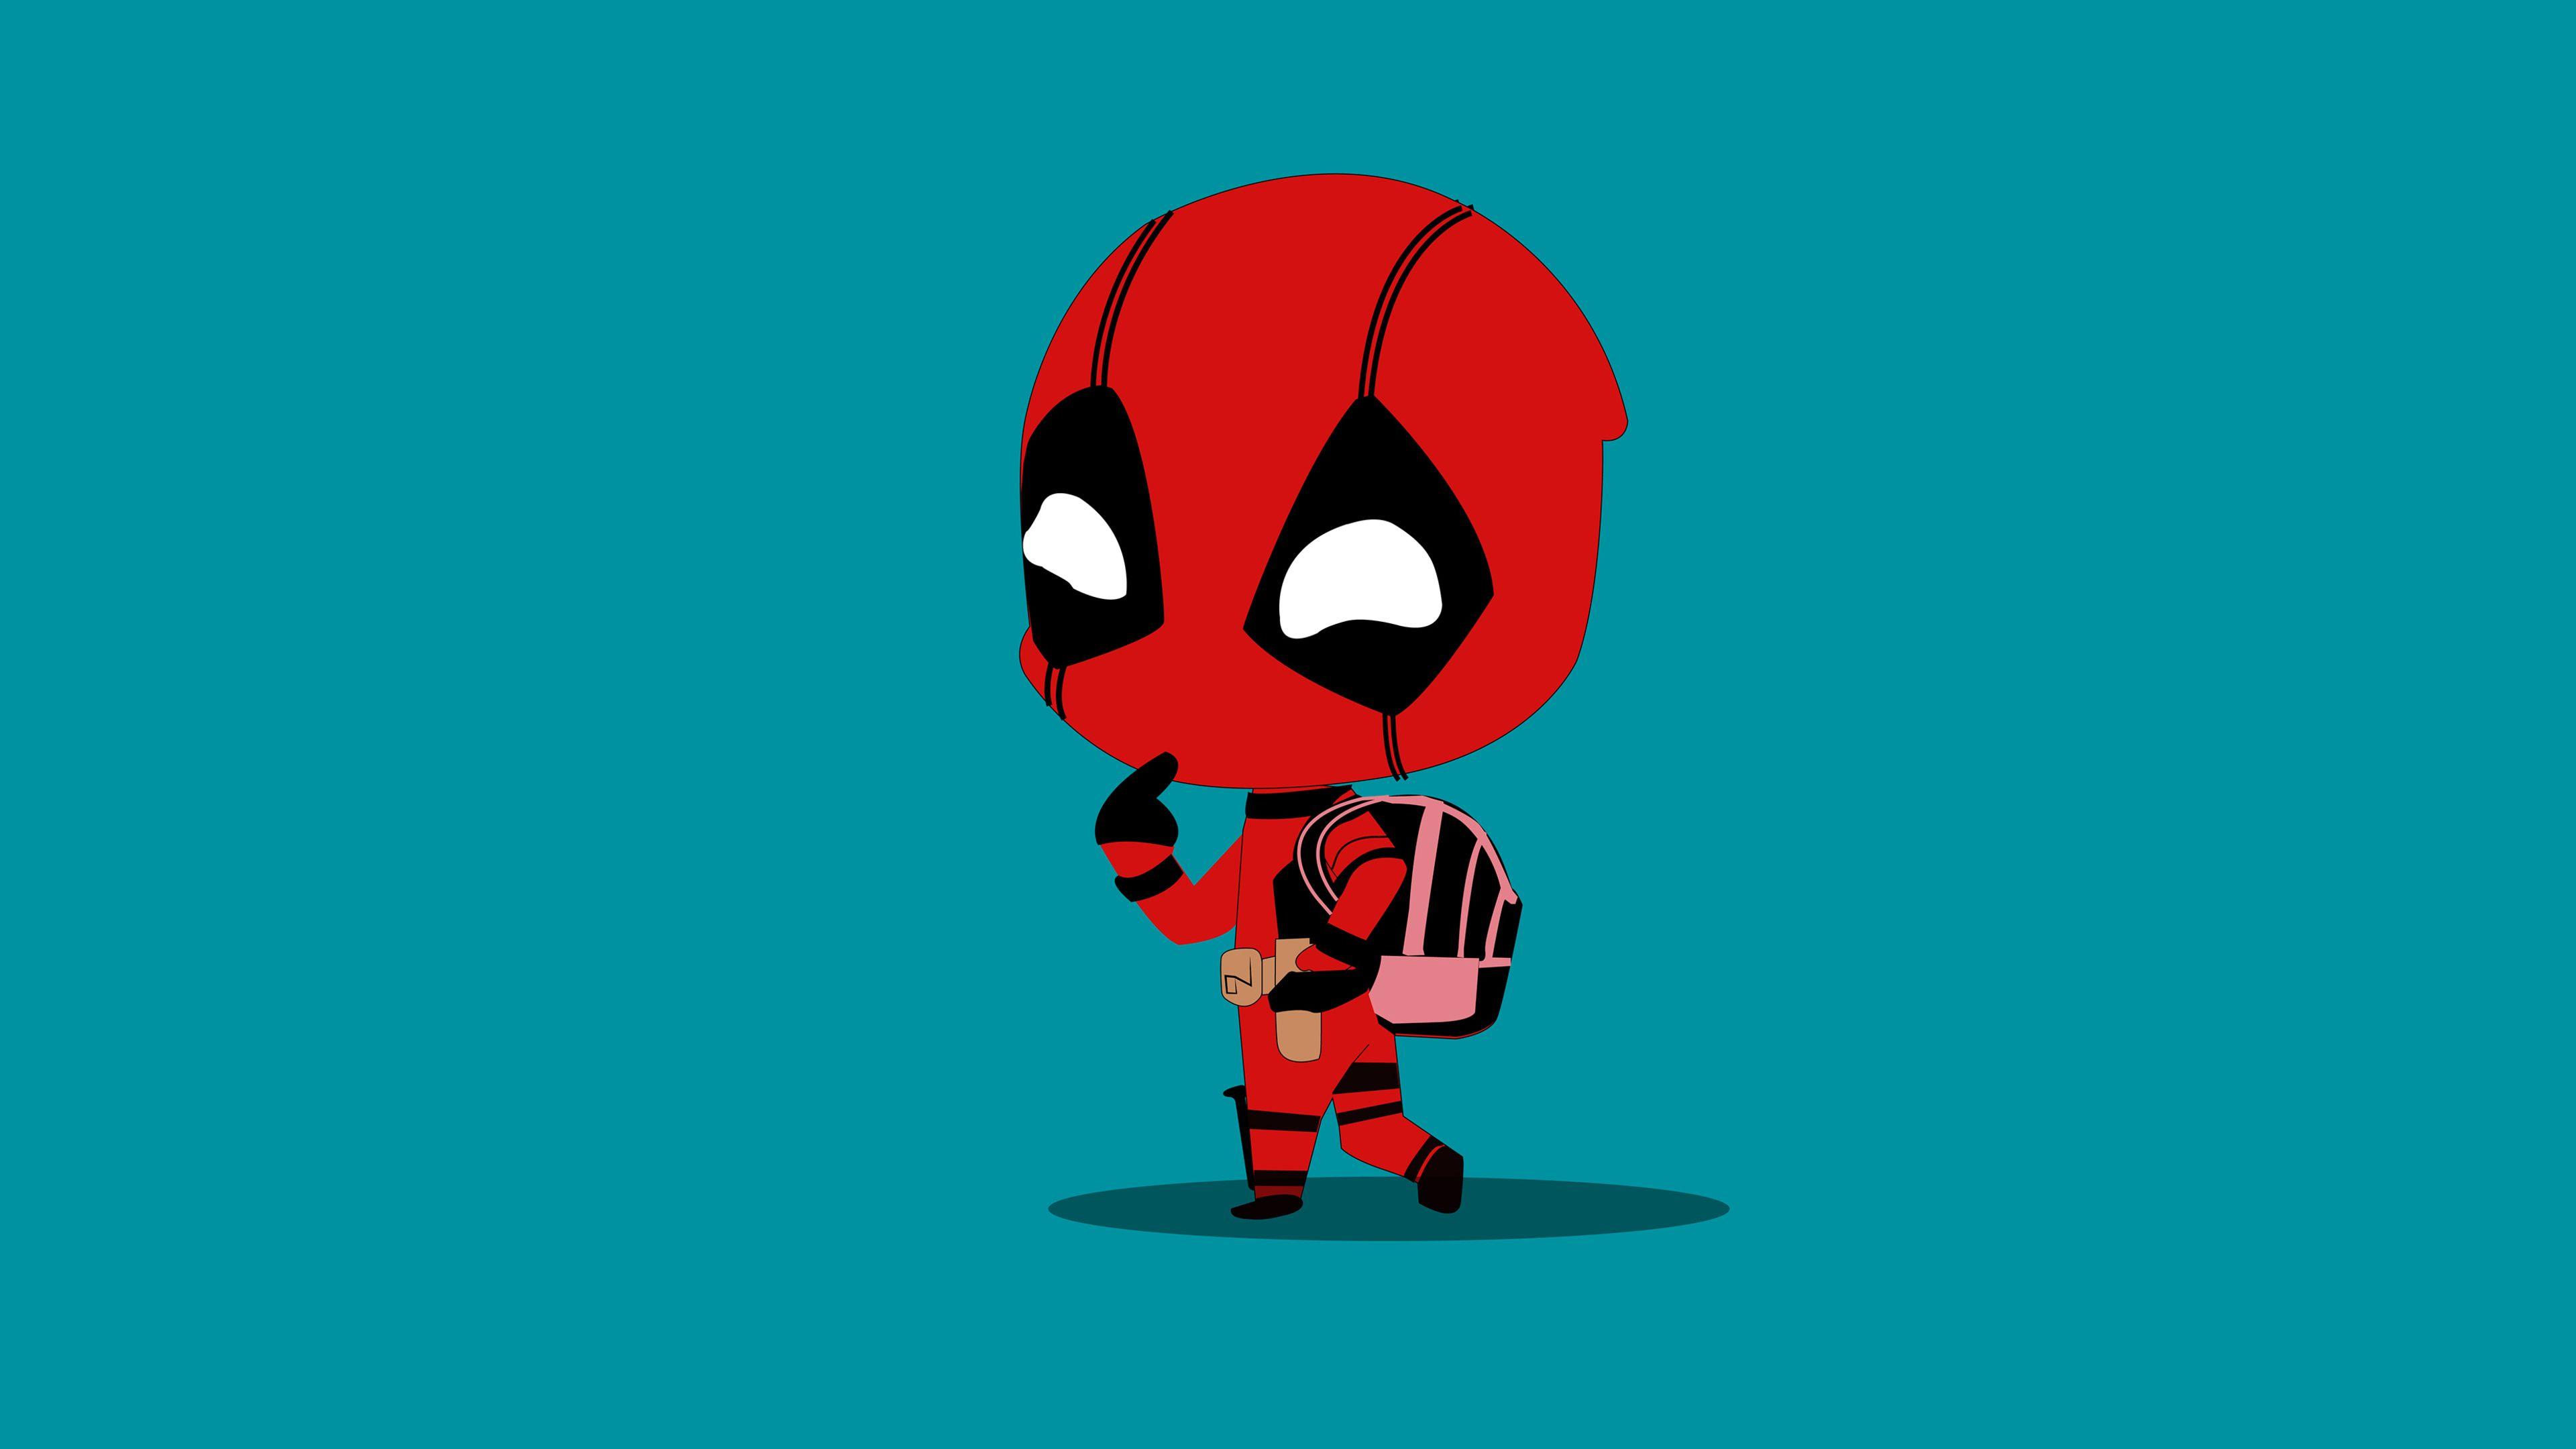 Deadpool Animated Wallpapers Top Free Deadpool Animated Backgrounds Wallpaperaccess